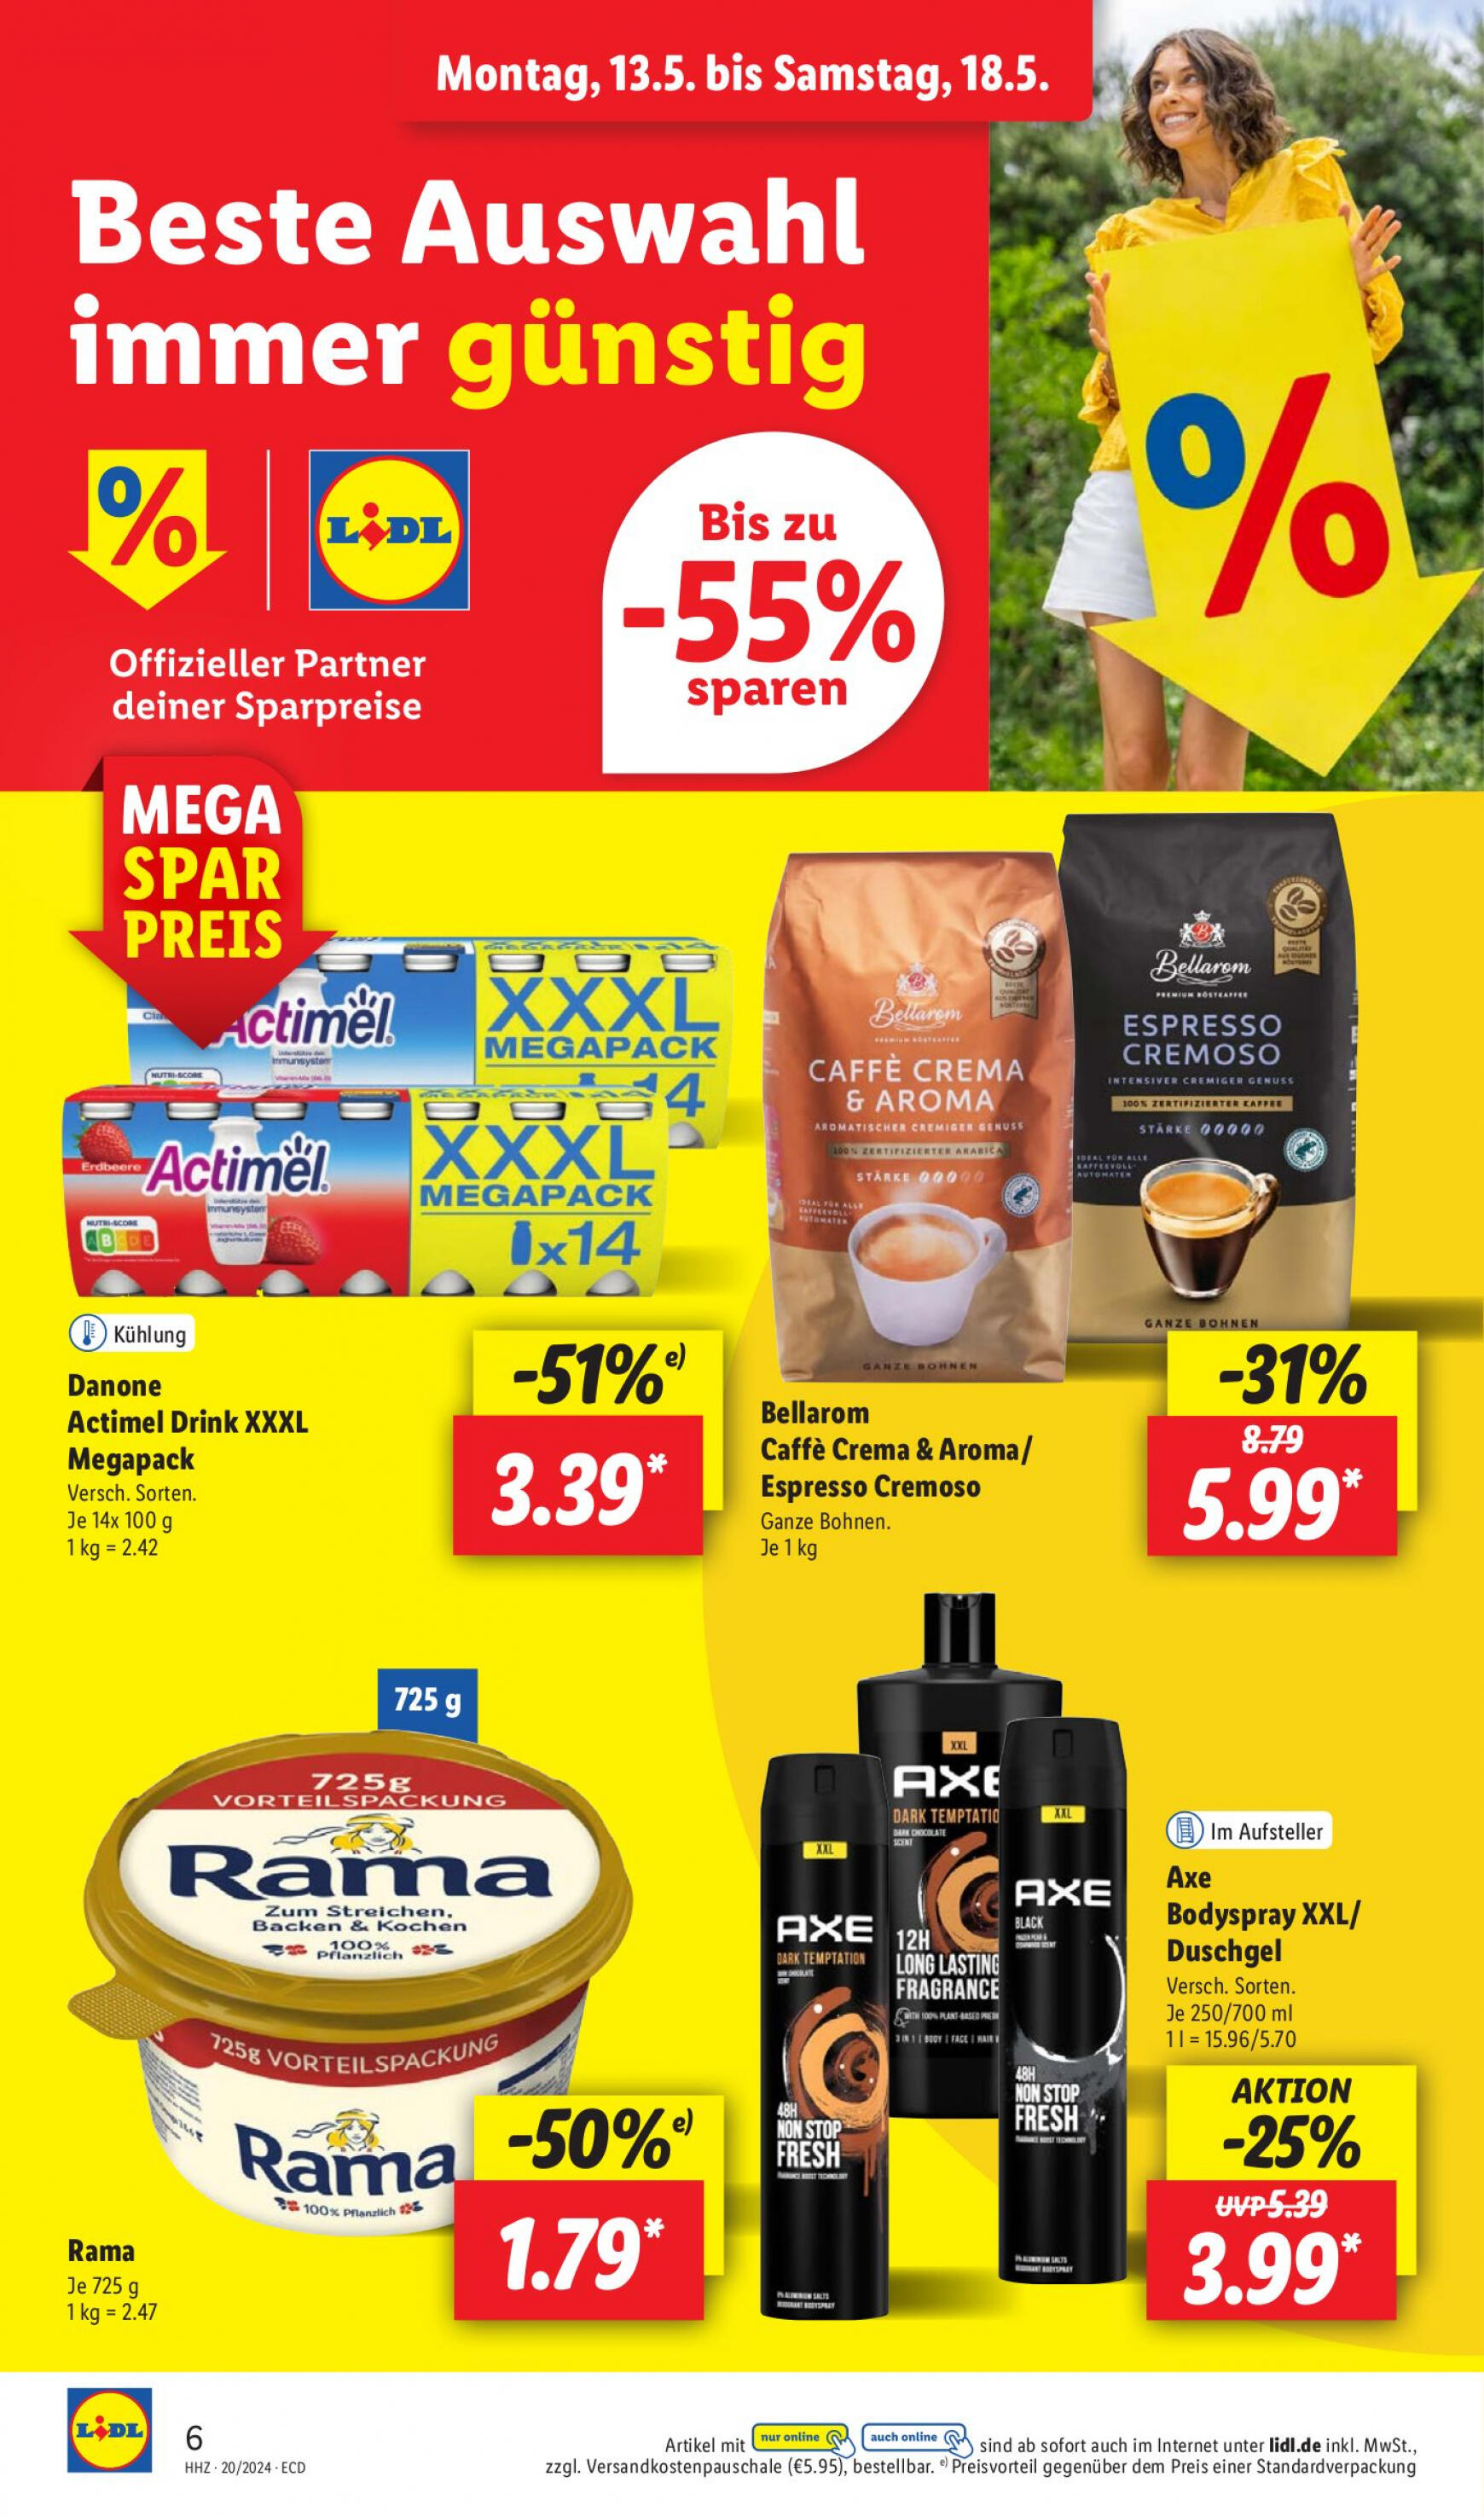 lidl - Flyer Lidl aktuell 13.05. - 18.05. - page: 8